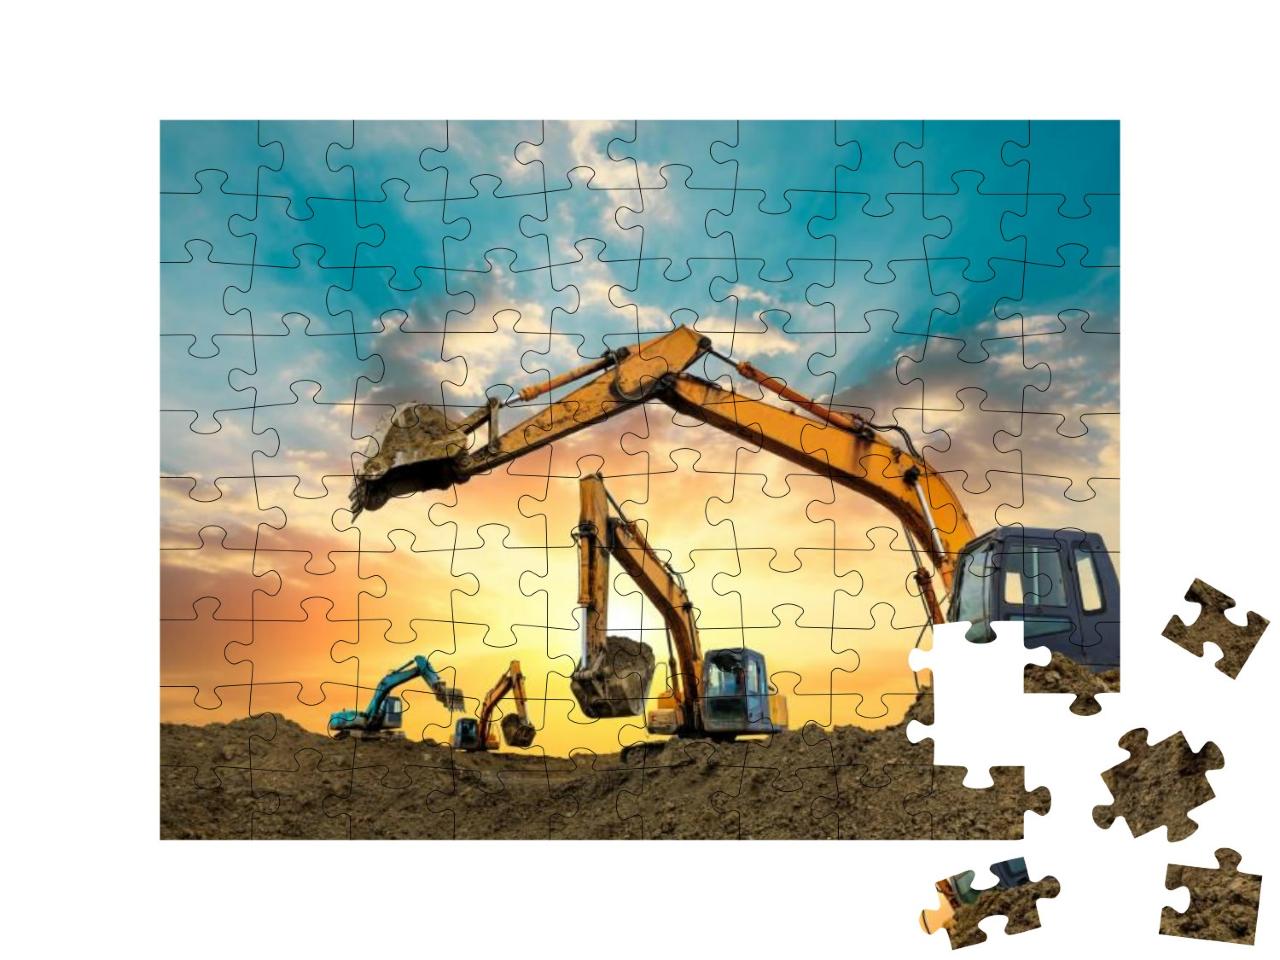 Four Excavators Work on Construction Site At Sunset... Jigsaw Puzzle with 100 pieces